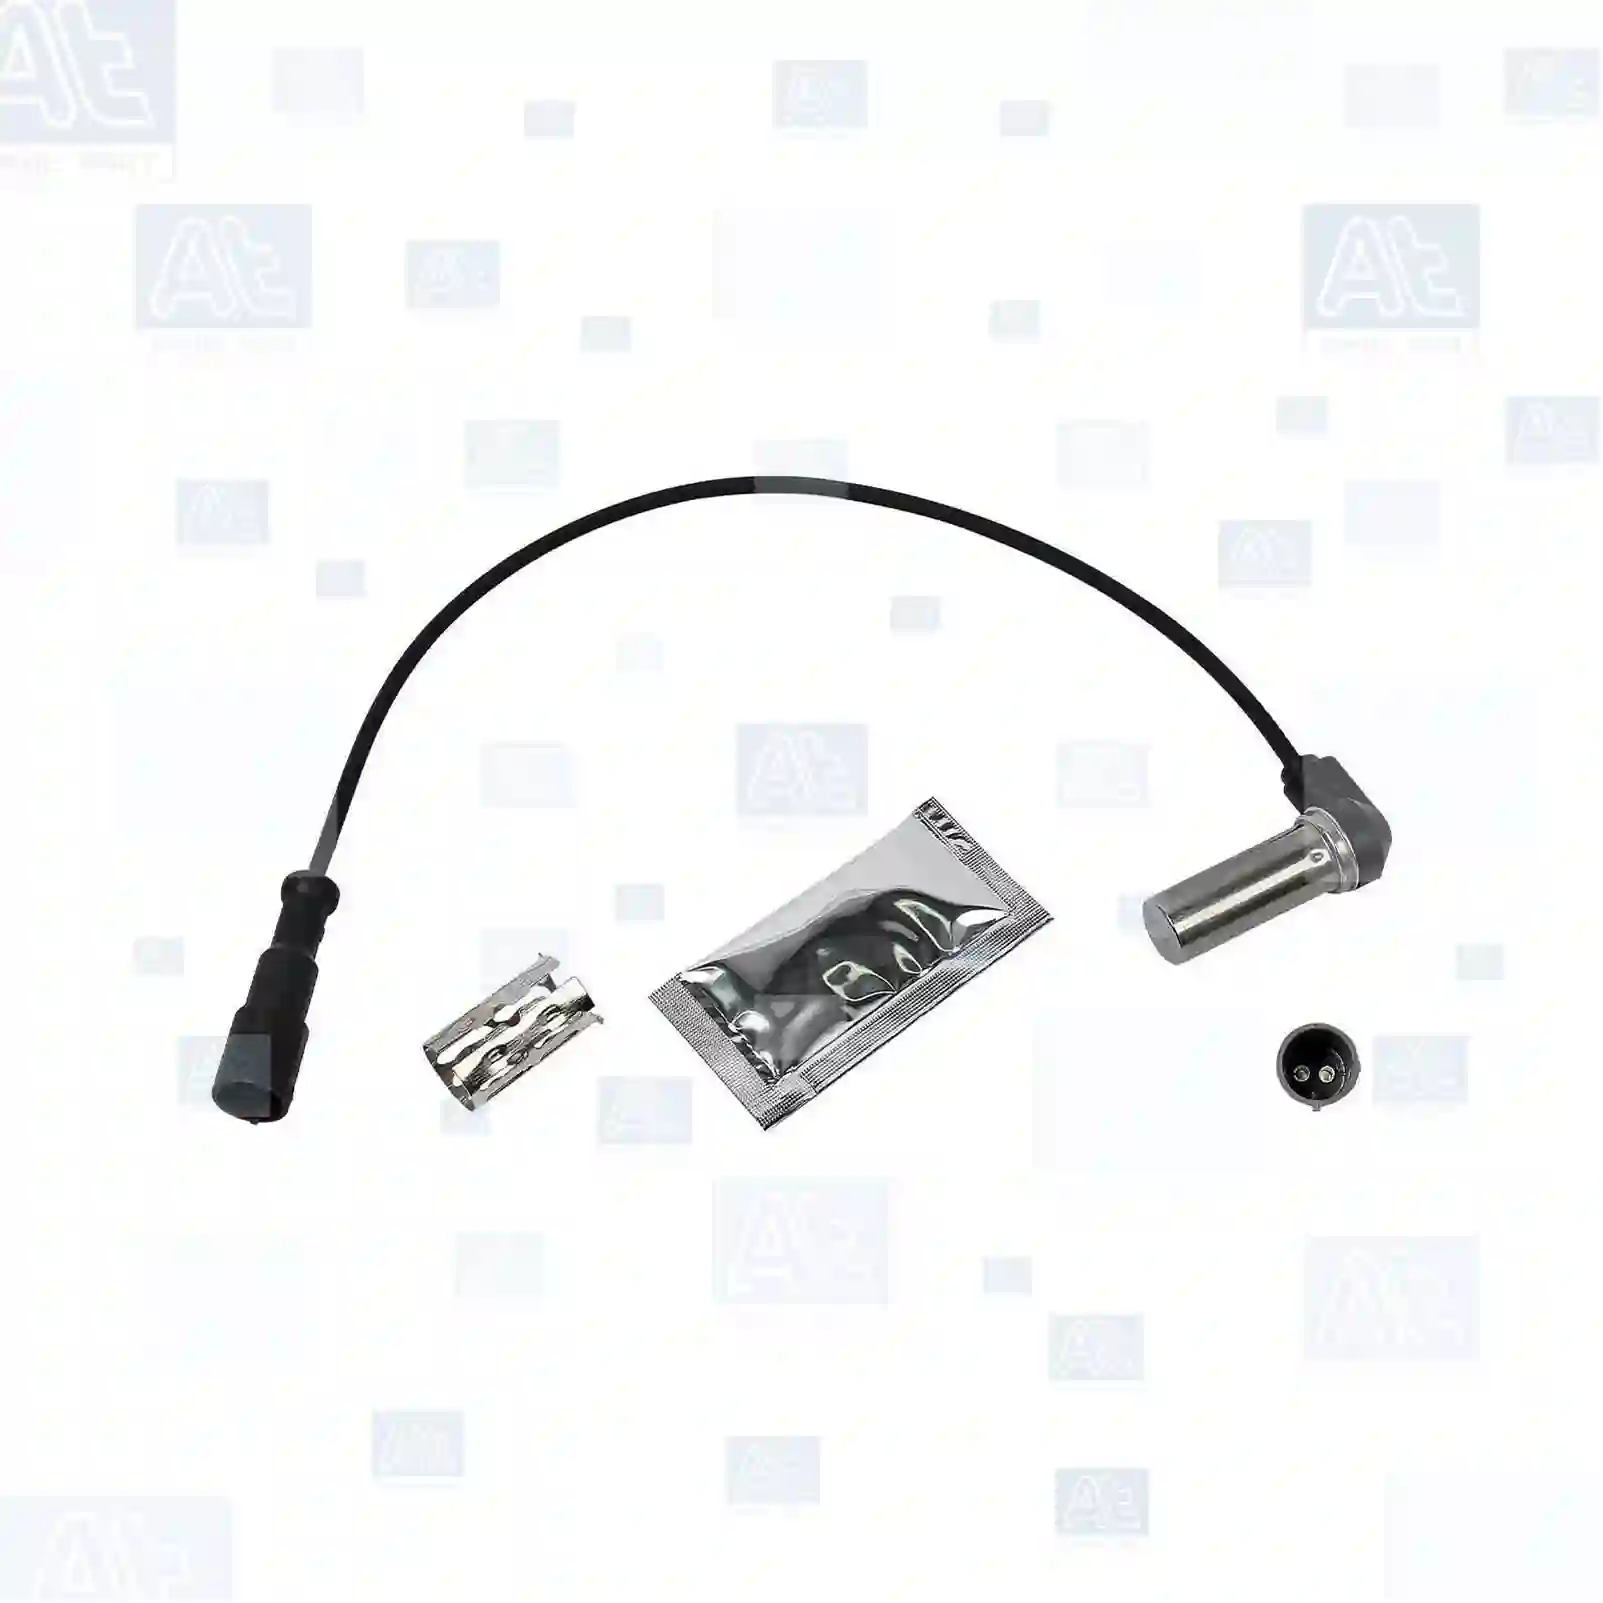 ABS sensor, 77710696, D04490401, 0233170100, 0233170500, 0082826, 1238548, 1315698, 1359834, 1504951, 1506005, 1518724, 1518728, 1616874, 1778552, 669713, 82826, 865038, 876714, CF102959, 708709158, 8709158, 42061638, 500641993, 5006041993, 5801115879, 9441032808, JAE0250410055, 80376, 692301708, 81271200021, 81271200023, N2255200061, 0025423118, 0045424418, 3015420117, 47900-9X403, 518029, 5000790125, 5010604322, 5021170121, 5021170122, 5021170125, 5021170127, 3029023100, 4029100200, 1784588, 1934568, 050019, 056718, 7788005000, 7788047000, 7788075000, 1195759, ZG50875-0008 ||  77710696 At Spare Part | Engine, Accelerator Pedal, Camshaft, Connecting Rod, Crankcase, Crankshaft, Cylinder Head, Engine Suspension Mountings, Exhaust Manifold, Exhaust Gas Recirculation, Filter Kits, Flywheel Housing, General Overhaul Kits, Engine, Intake Manifold, Oil Cleaner, Oil Cooler, Oil Filter, Oil Pump, Oil Sump, Piston & Liner, Sensor & Switch, Timing Case, Turbocharger, Cooling System, Belt Tensioner, Coolant Filter, Coolant Pipe, Corrosion Prevention Agent, Drive, Expansion Tank, Fan, Intercooler, Monitors & Gauges, Radiator, Thermostat, V-Belt / Timing belt, Water Pump, Fuel System, Electronical Injector Unit, Feed Pump, Fuel Filter, cpl., Fuel Gauge Sender,  Fuel Line, Fuel Pump, Fuel Tank, Injection Line Kit, Injection Pump, Exhaust System, Clutch & Pedal, Gearbox, Propeller Shaft, Axles, Brake System, Hubs & Wheels, Suspension, Leaf Spring, Universal Parts / Accessories, Steering, Electrical System, Cabin ABS sensor, 77710696, D04490401, 0233170100, 0233170500, 0082826, 1238548, 1315698, 1359834, 1504951, 1506005, 1518724, 1518728, 1616874, 1778552, 669713, 82826, 865038, 876714, CF102959, 708709158, 8709158, 42061638, 500641993, 5006041993, 5801115879, 9441032808, JAE0250410055, 80376, 692301708, 81271200021, 81271200023, N2255200061, 0025423118, 0045424418, 3015420117, 47900-9X403, 518029, 5000790125, 5010604322, 5021170121, 5021170122, 5021170125, 5021170127, 3029023100, 4029100200, 1784588, 1934568, 050019, 056718, 7788005000, 7788047000, 7788075000, 1195759, ZG50875-0008 ||  77710696 At Spare Part | Engine, Accelerator Pedal, Camshaft, Connecting Rod, Crankcase, Crankshaft, Cylinder Head, Engine Suspension Mountings, Exhaust Manifold, Exhaust Gas Recirculation, Filter Kits, Flywheel Housing, General Overhaul Kits, Engine, Intake Manifold, Oil Cleaner, Oil Cooler, Oil Filter, Oil Pump, Oil Sump, Piston & Liner, Sensor & Switch, Timing Case, Turbocharger, Cooling System, Belt Tensioner, Coolant Filter, Coolant Pipe, Corrosion Prevention Agent, Drive, Expansion Tank, Fan, Intercooler, Monitors & Gauges, Radiator, Thermostat, V-Belt / Timing belt, Water Pump, Fuel System, Electronical Injector Unit, Feed Pump, Fuel Filter, cpl., Fuel Gauge Sender,  Fuel Line, Fuel Pump, Fuel Tank, Injection Line Kit, Injection Pump, Exhaust System, Clutch & Pedal, Gearbox, Propeller Shaft, Axles, Brake System, Hubs & Wheels, Suspension, Leaf Spring, Universal Parts / Accessories, Steering, Electrical System, Cabin